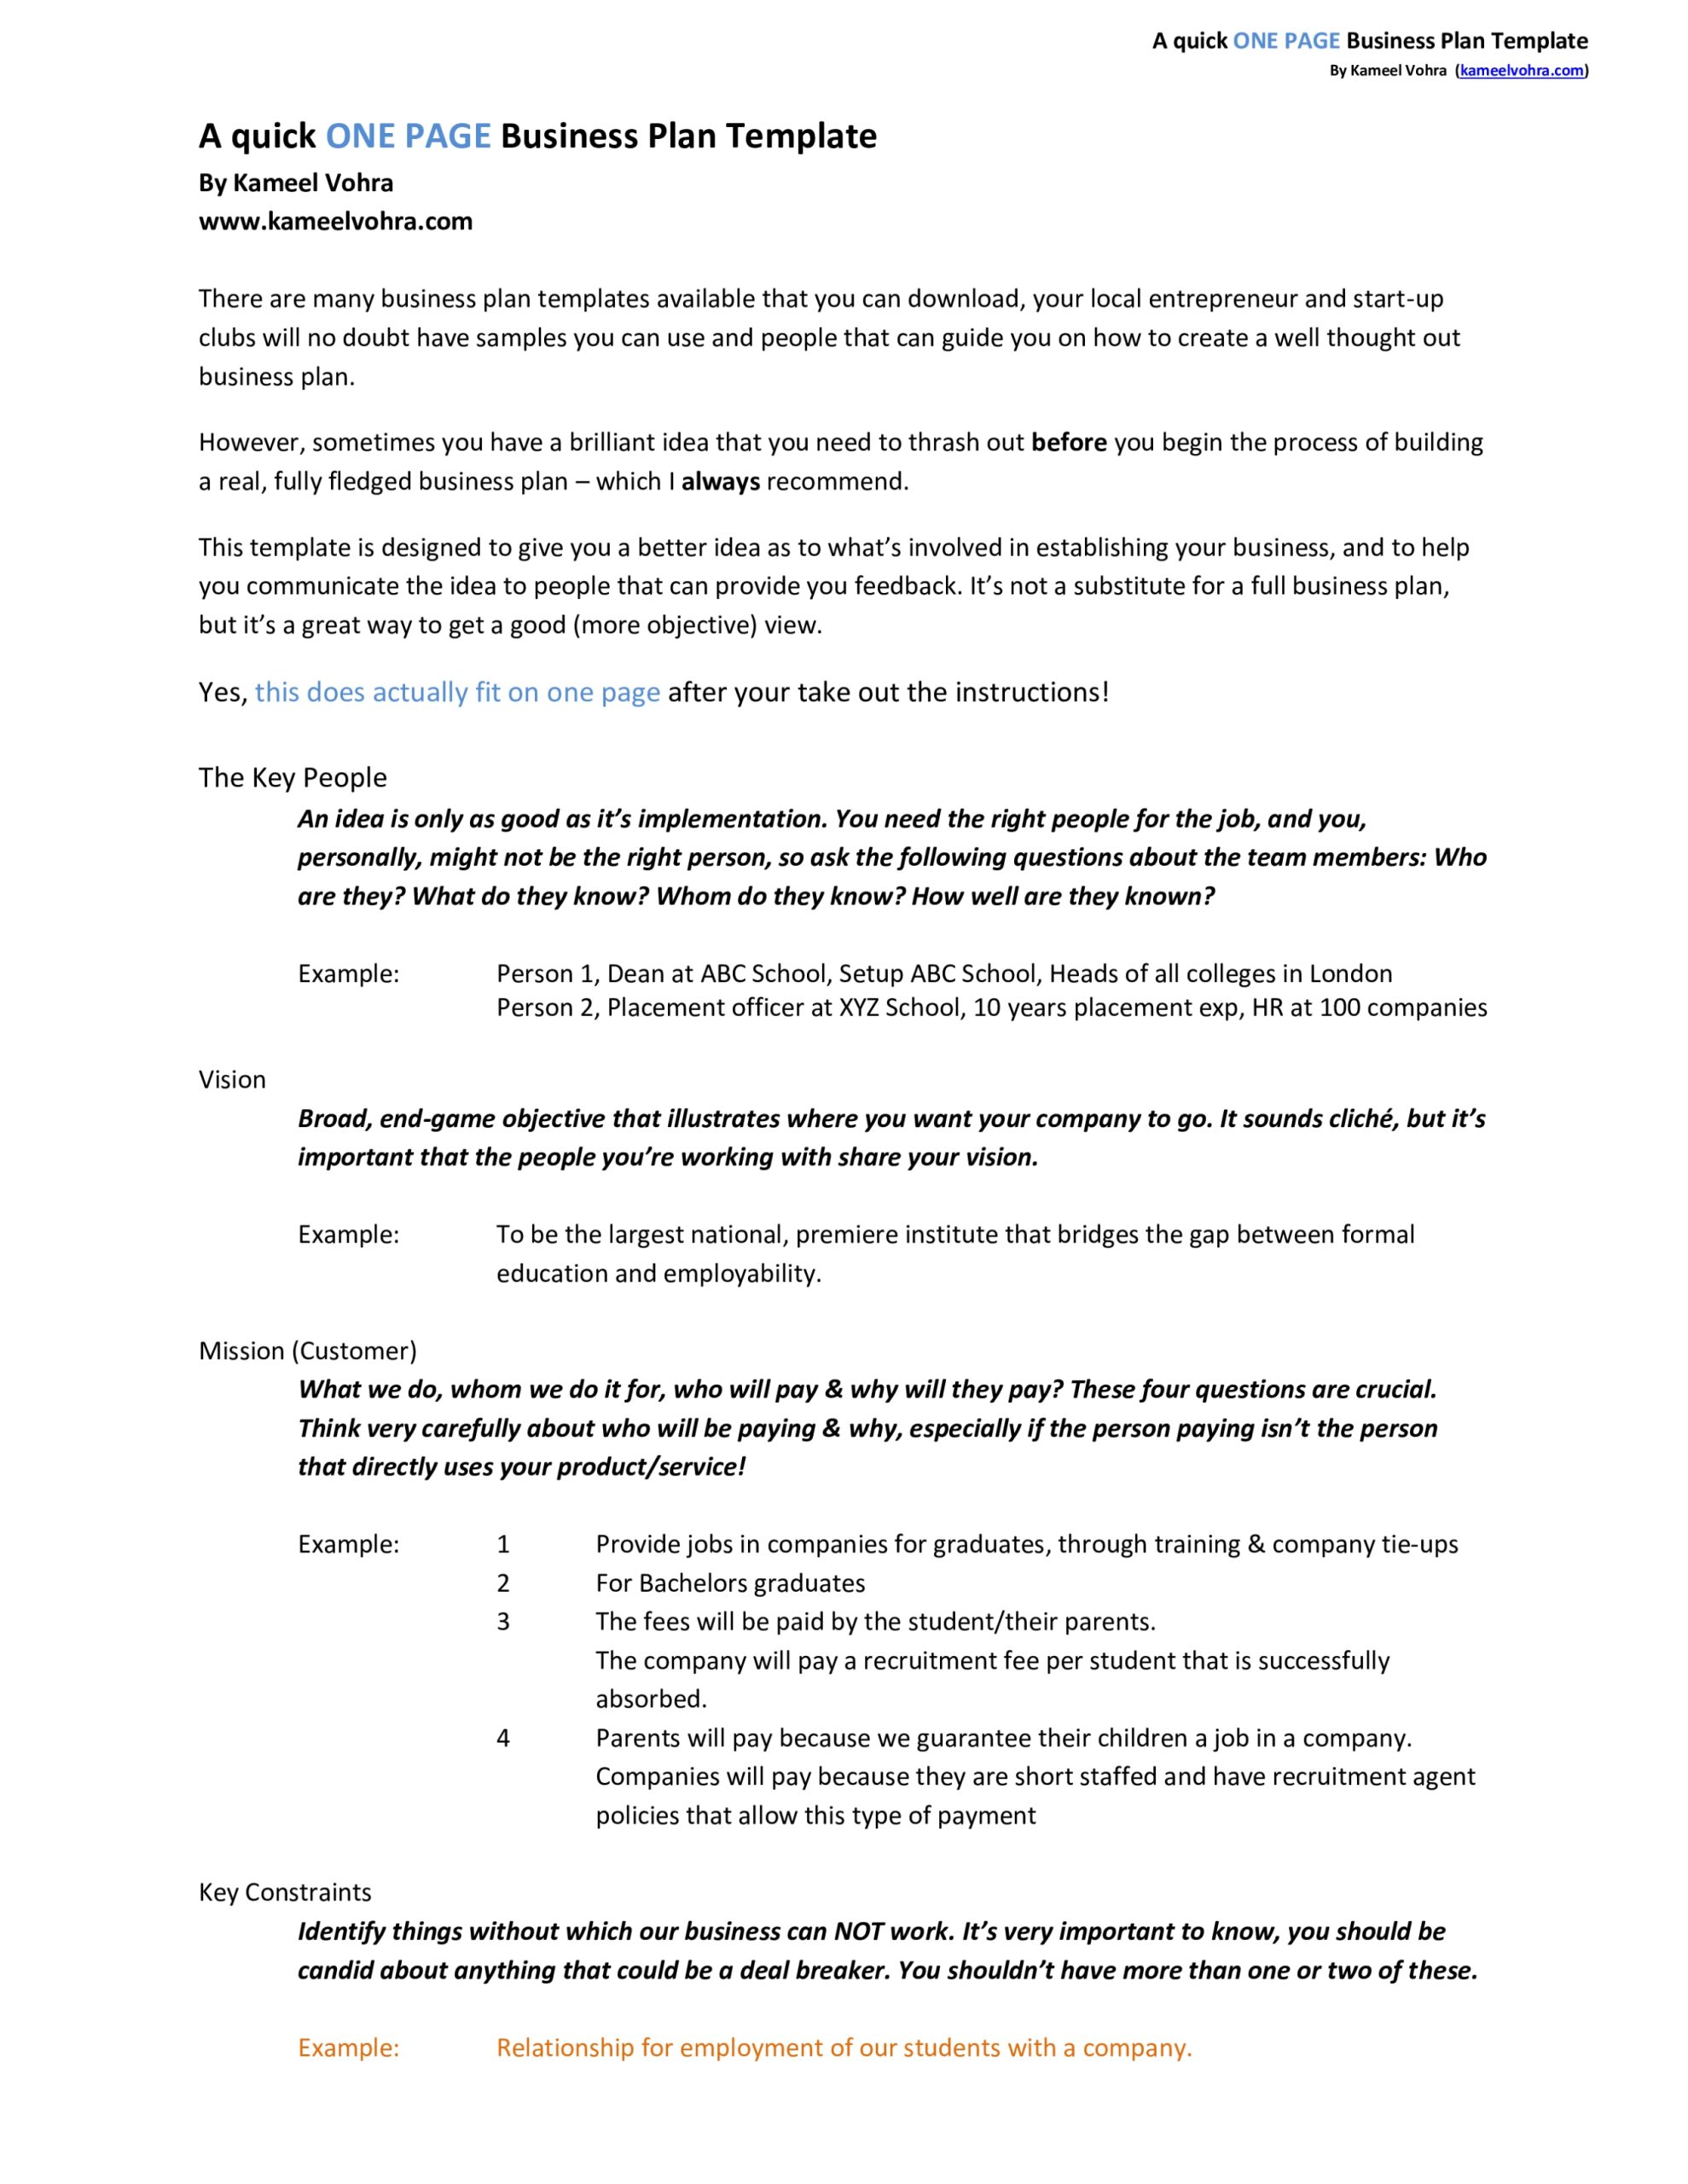 A Quick One Page Business Plan Template - Eloquens Regarding 1 Page Business Plan Templates Free